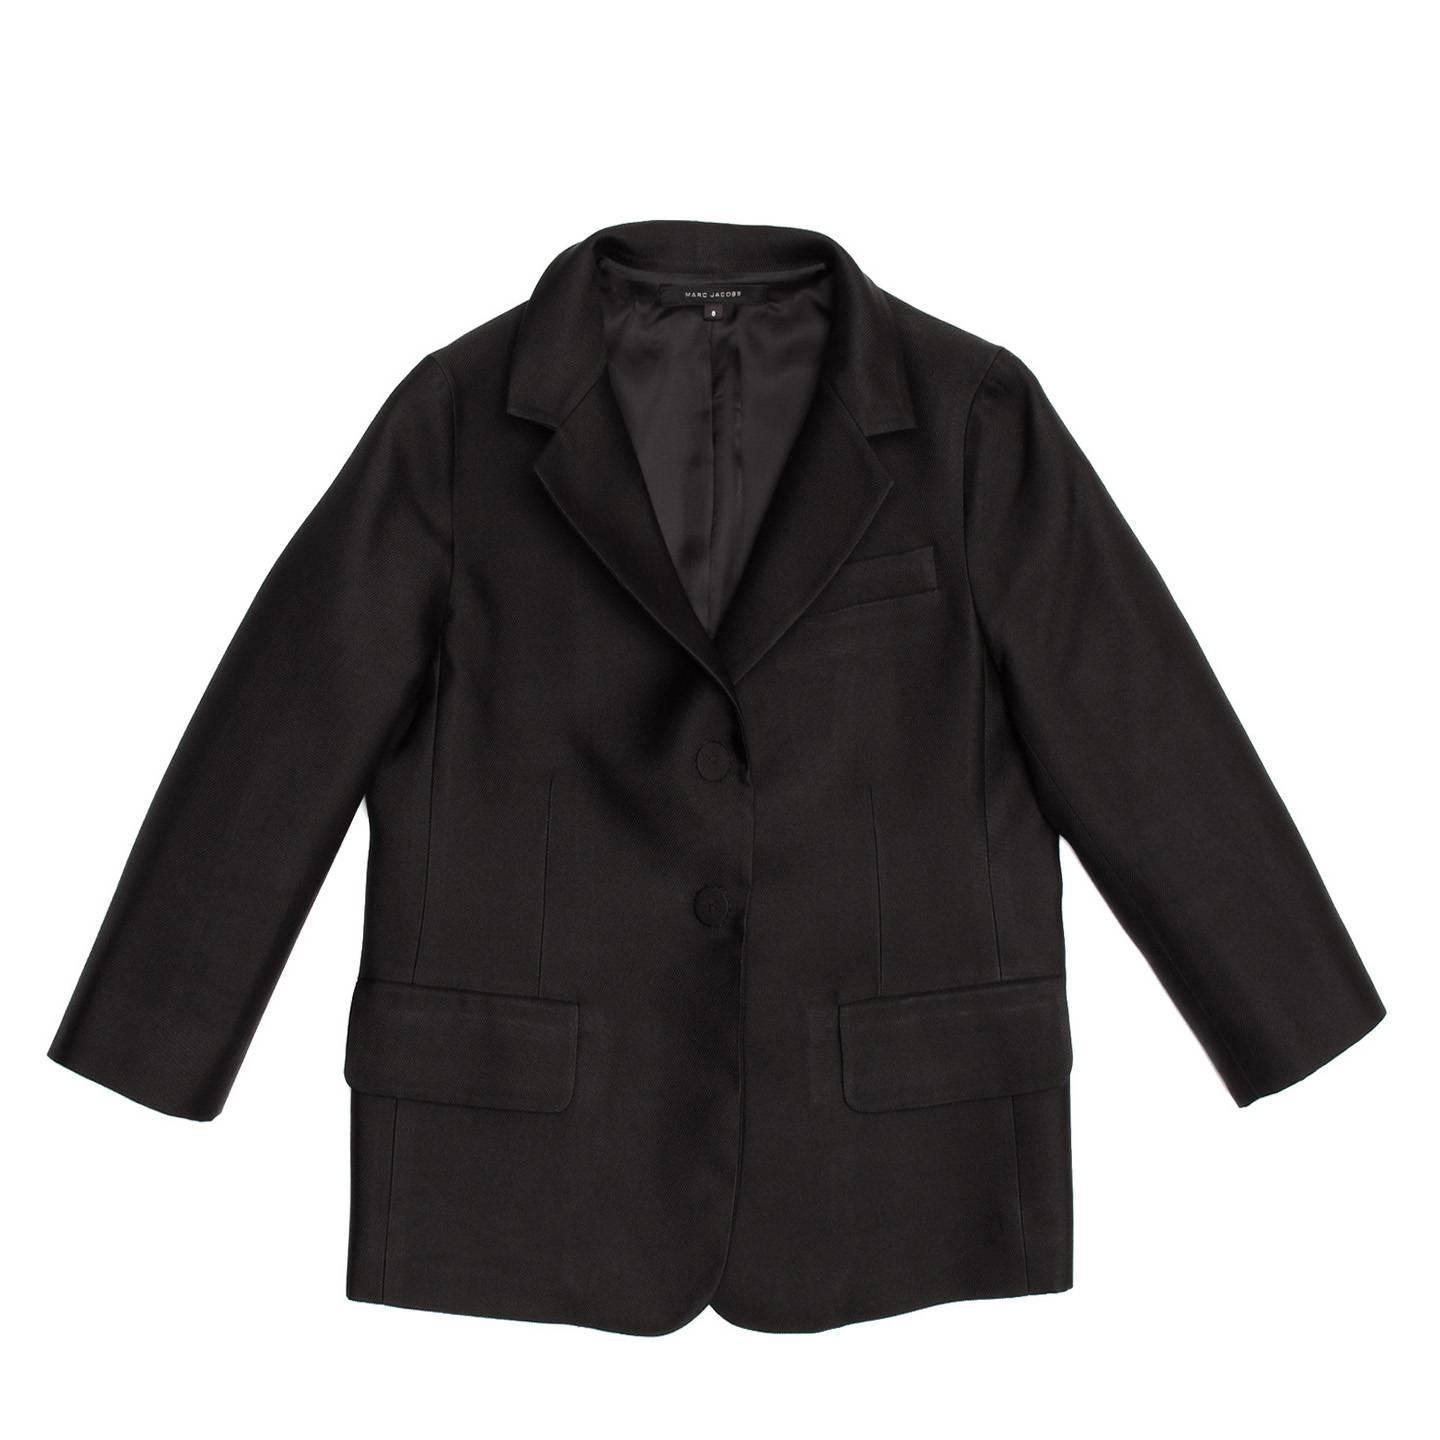 Black silk shrunken boy style jacket with 3/4 length sleeves. Single breasted closure with two large snap buttons highlighted on the outer layer with beautiful thick hand stitches and elegantly covered with fabric in the inner layer. Single vent at